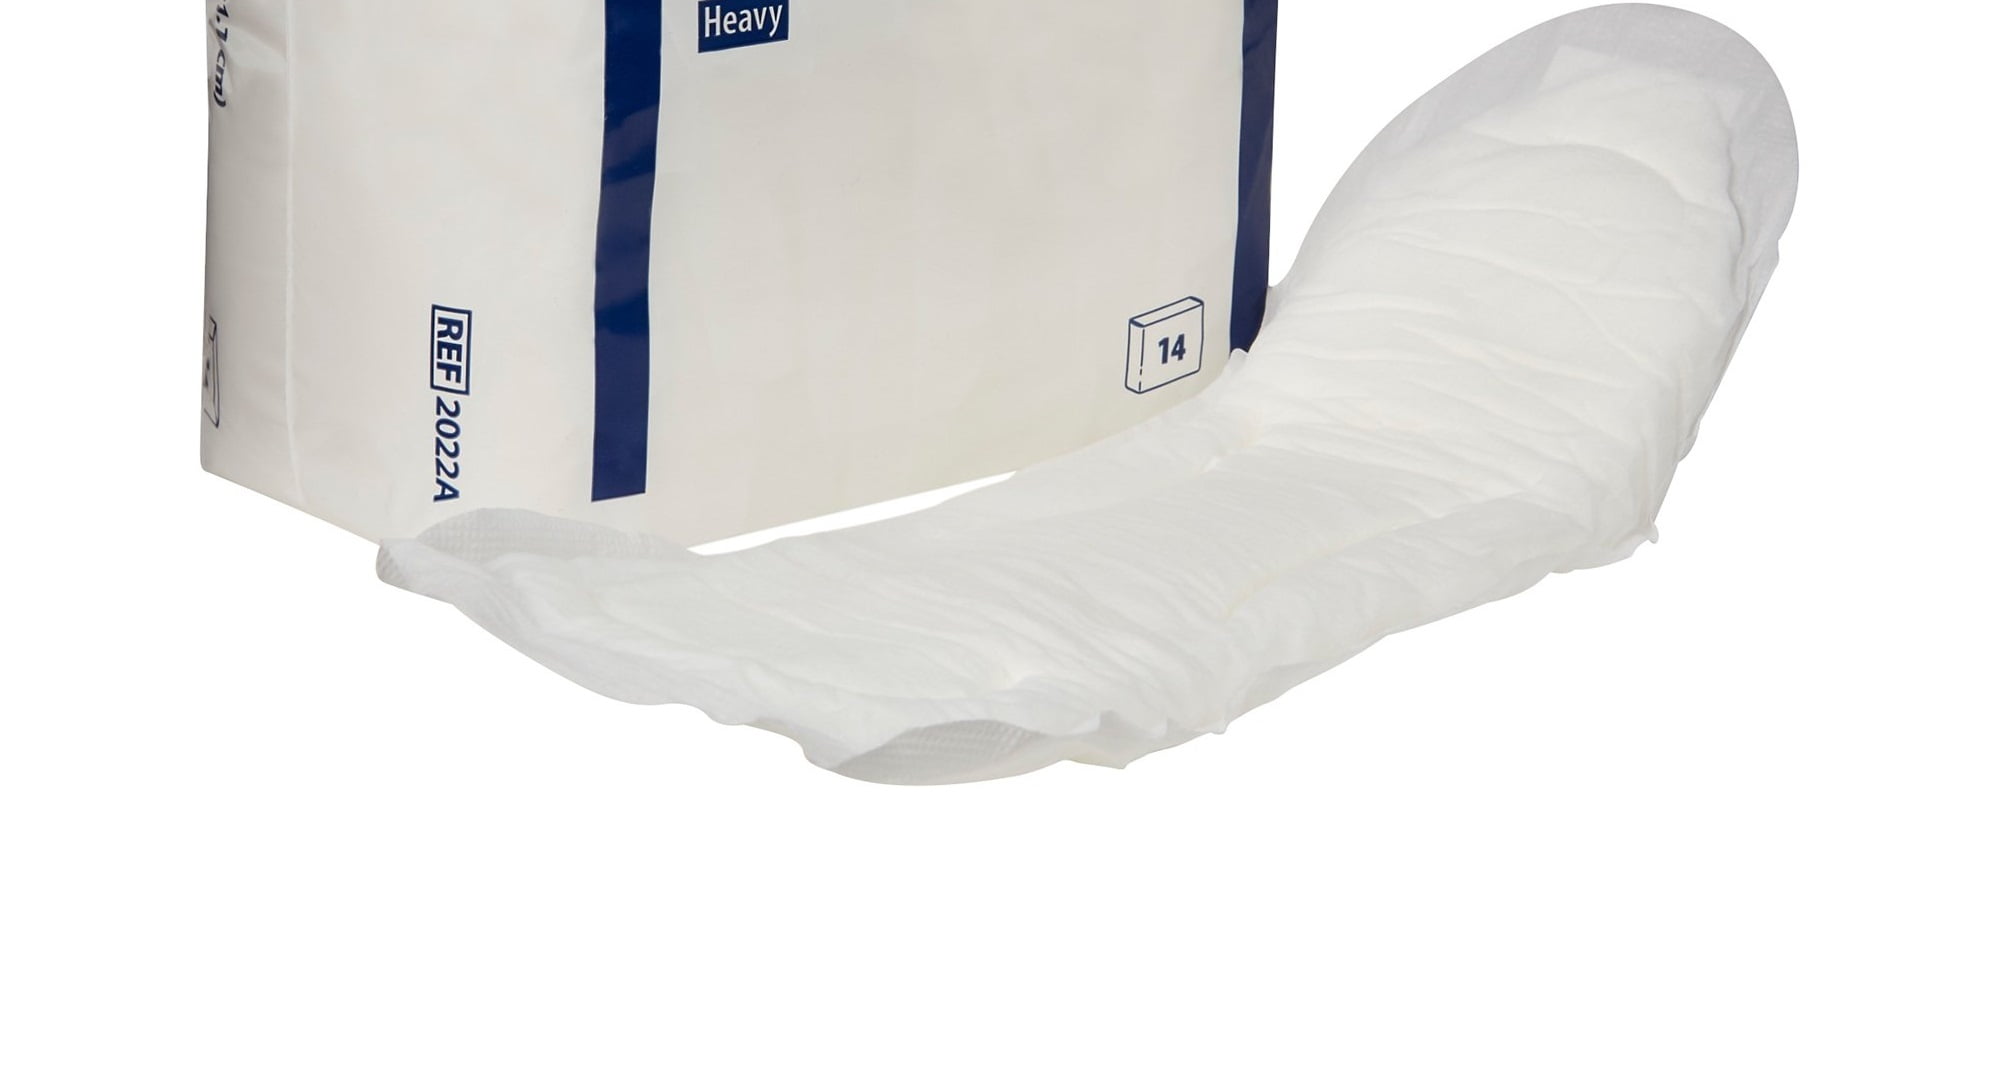 Covidien Curity Maternity Pad Heavy 4.33 x 12.25 (Bag of 14 Pads) 